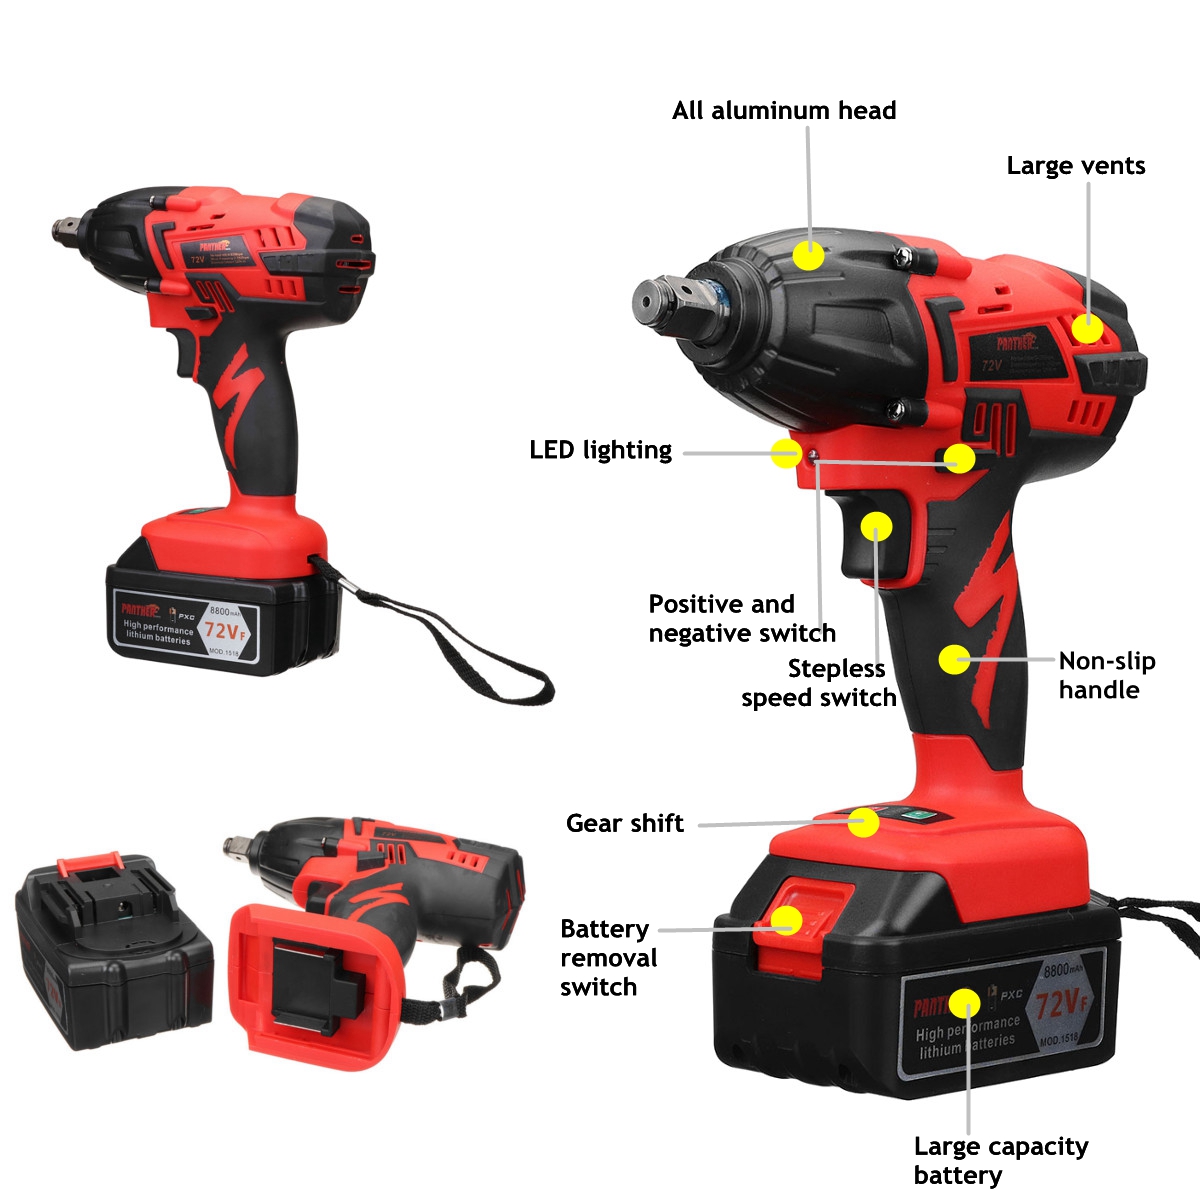 8800mah-Cordless-Electric-Impact-Wrench-LED-Light-320Nm-Torque-Impact-Wrench-Li-Ion-Battery-1402464-4